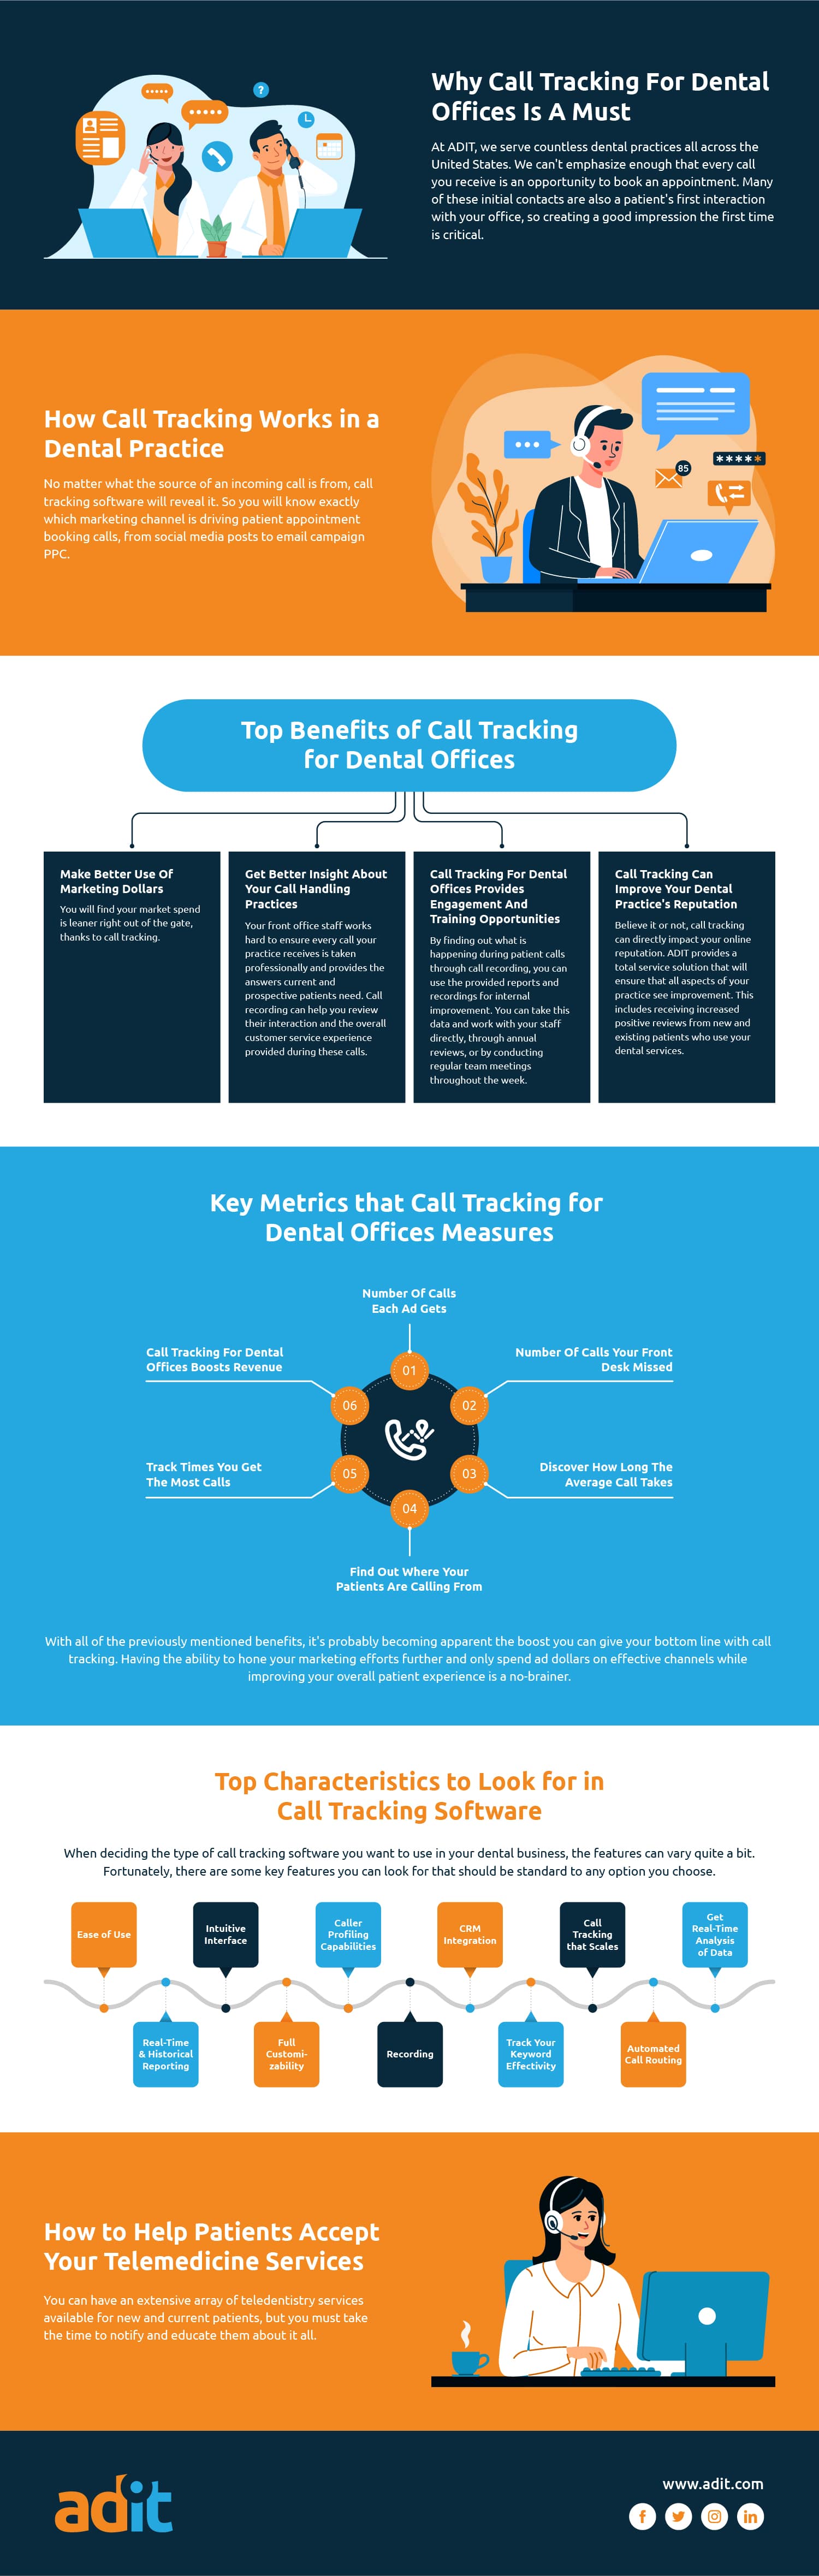 Why Call Tracking For Dental Offices Is A Must